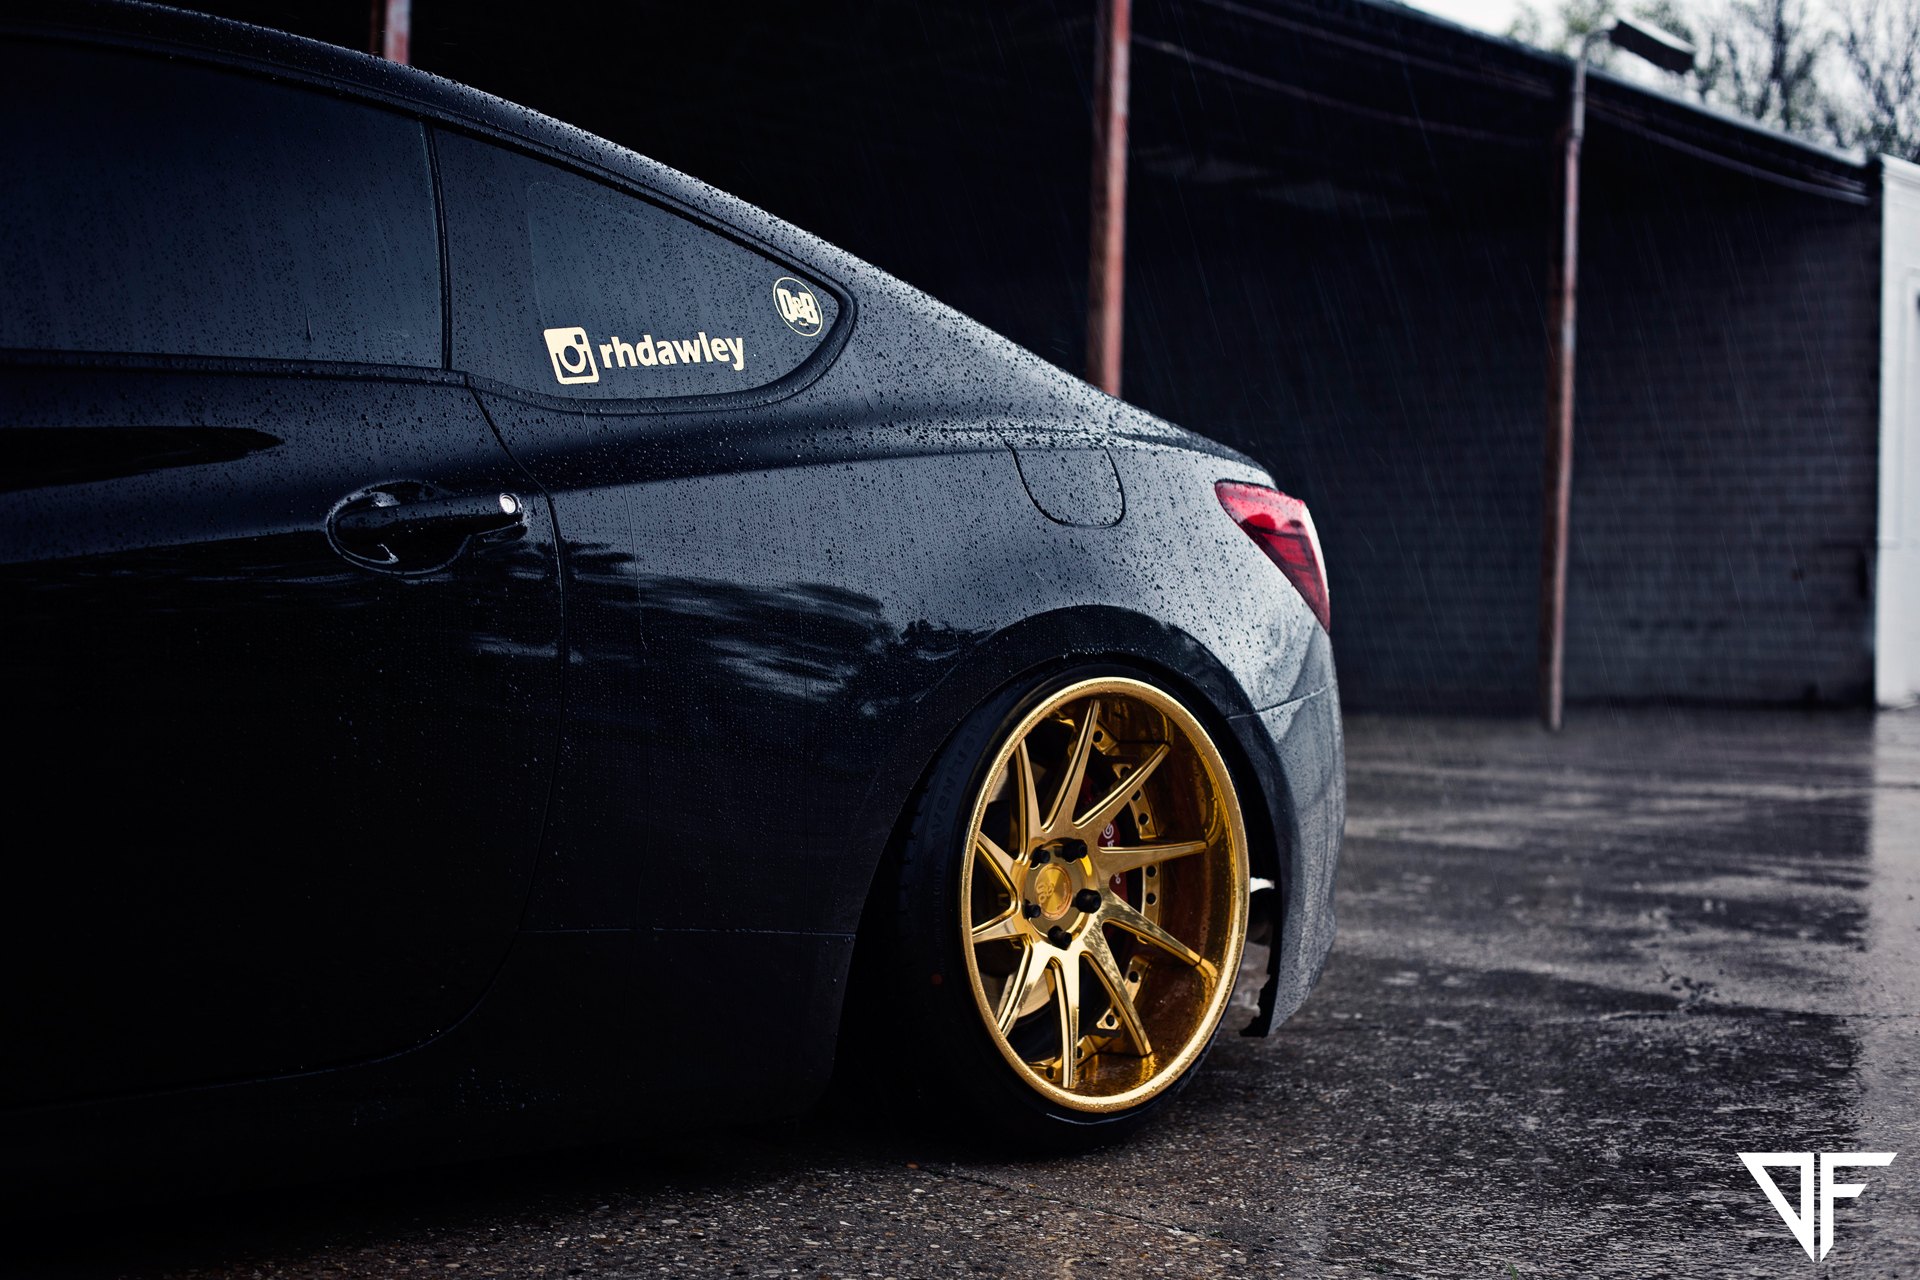 Hyundai Genesis Coupe With Staggered Wheels - Photo by Avant Garde